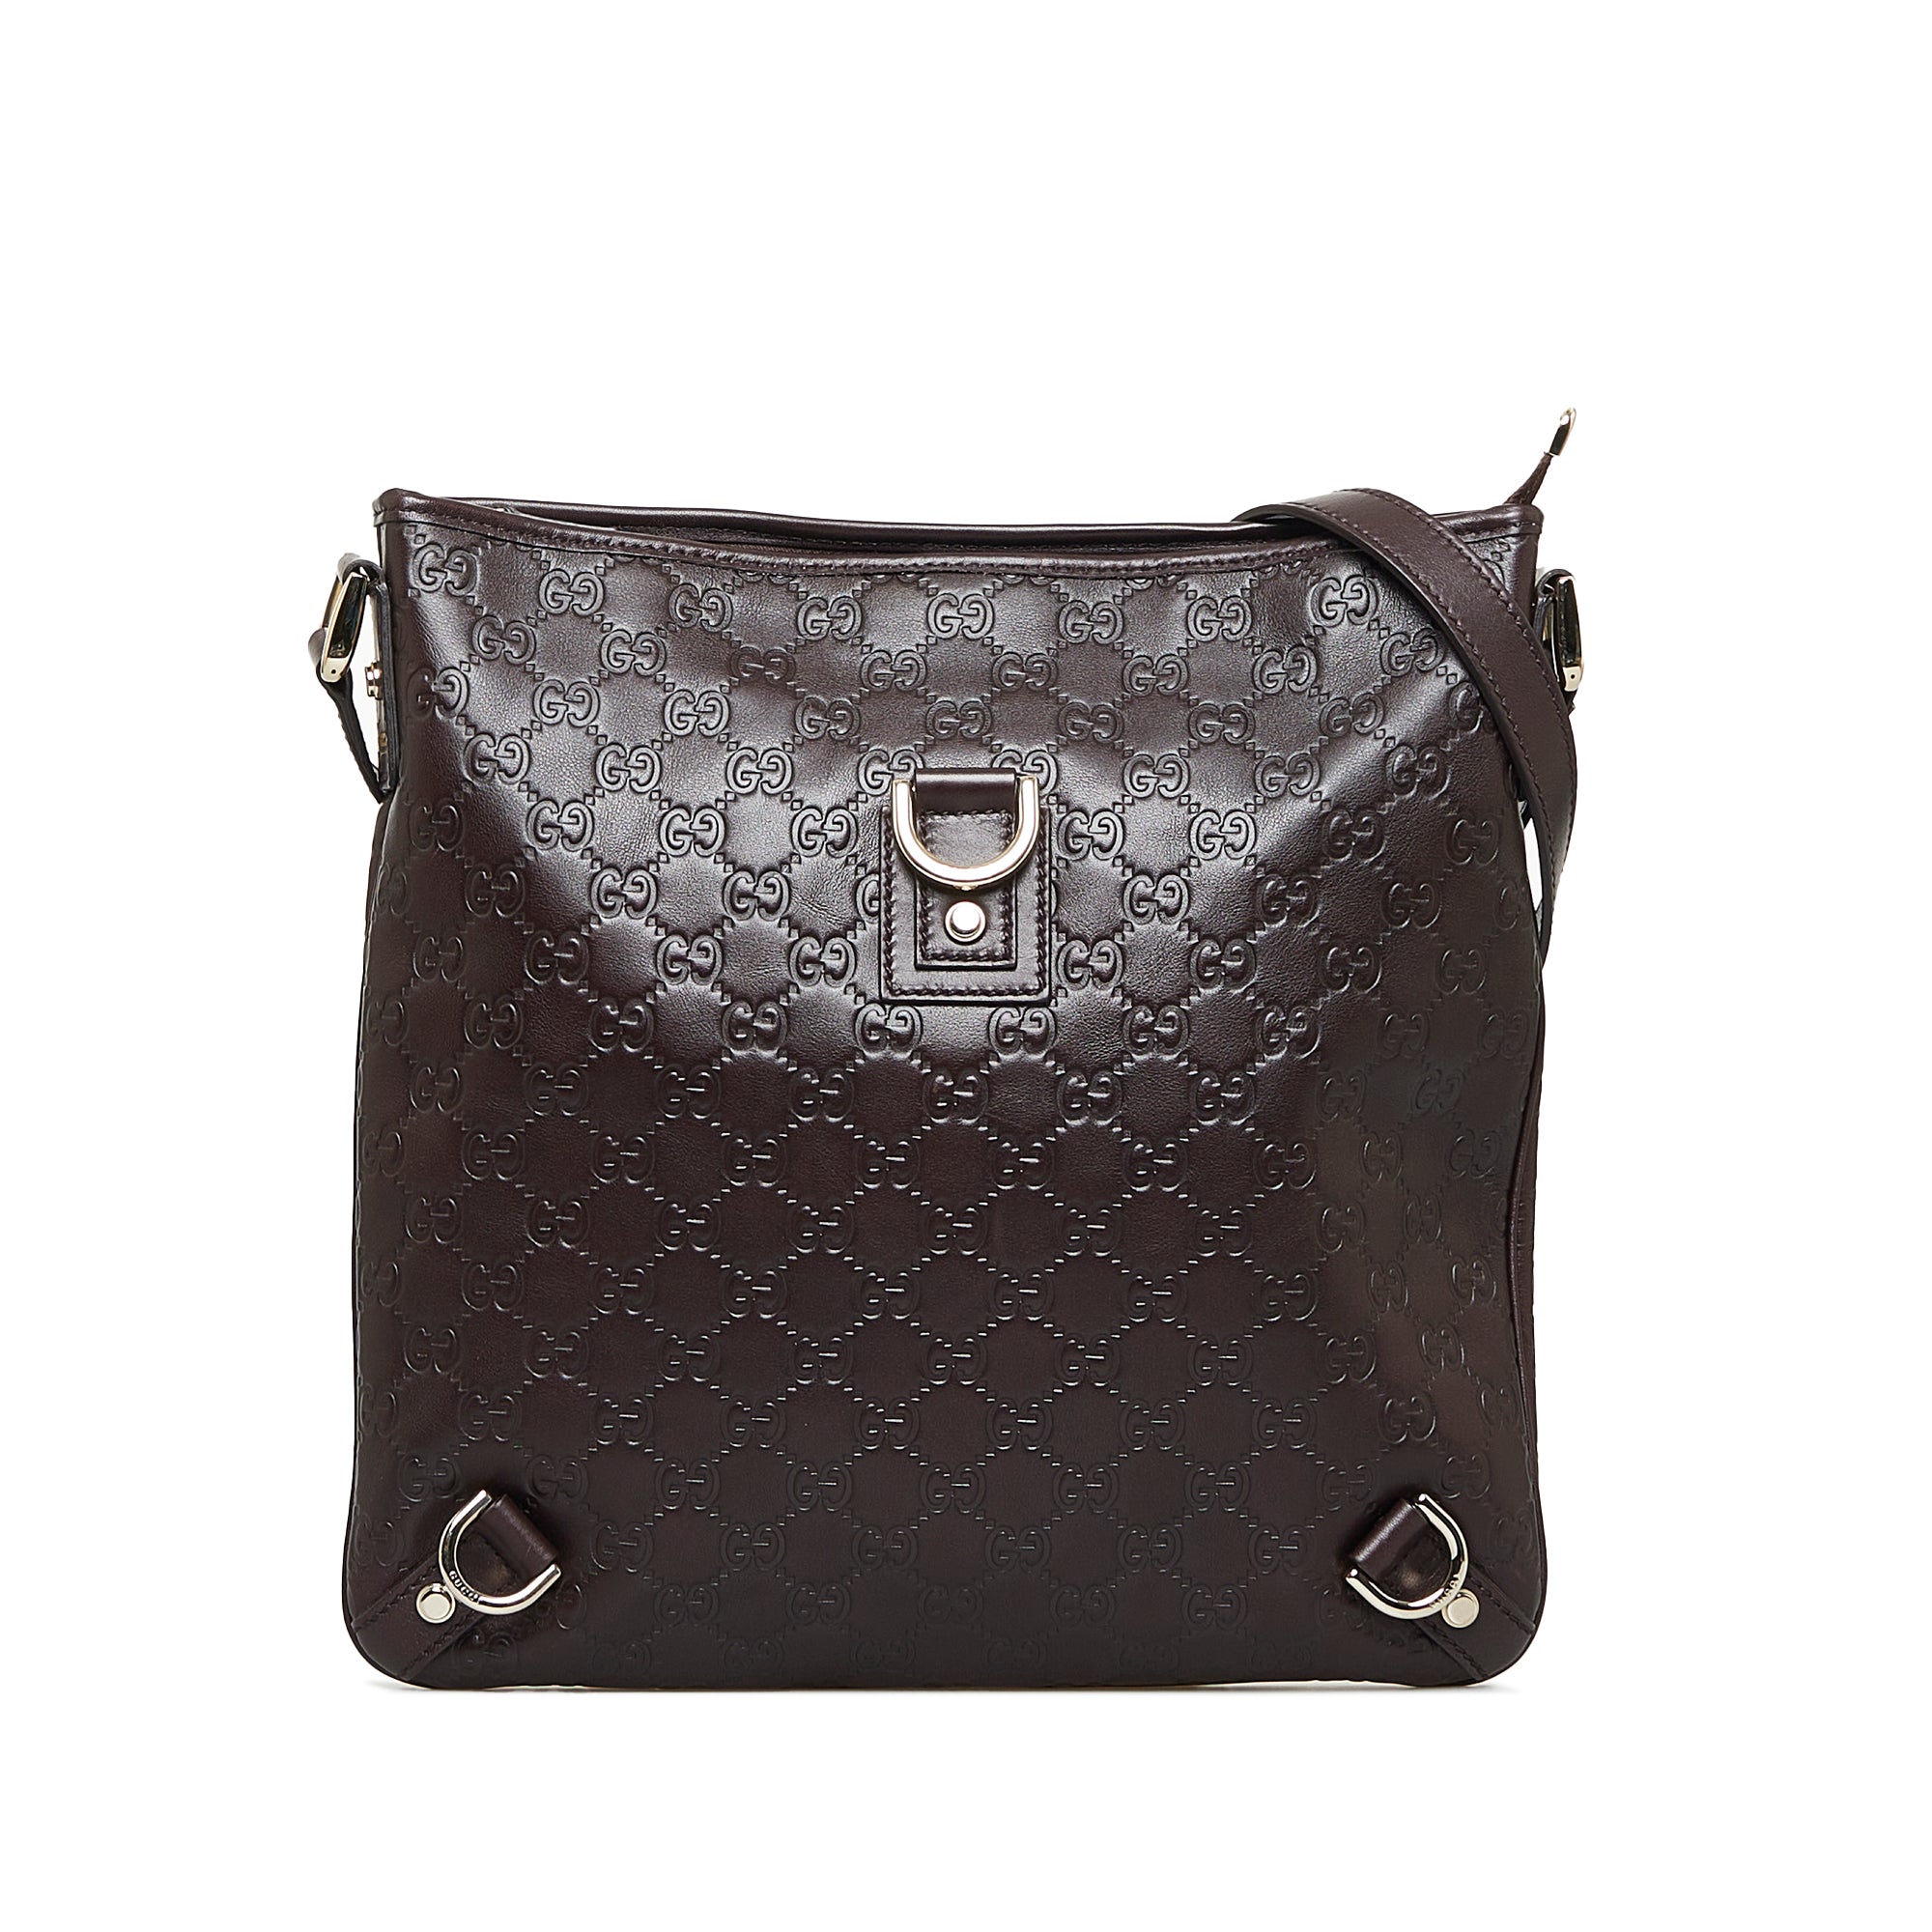 Gucci Crossbody Bag Sale | Guccissima Leather Gray | BagBuyBuy